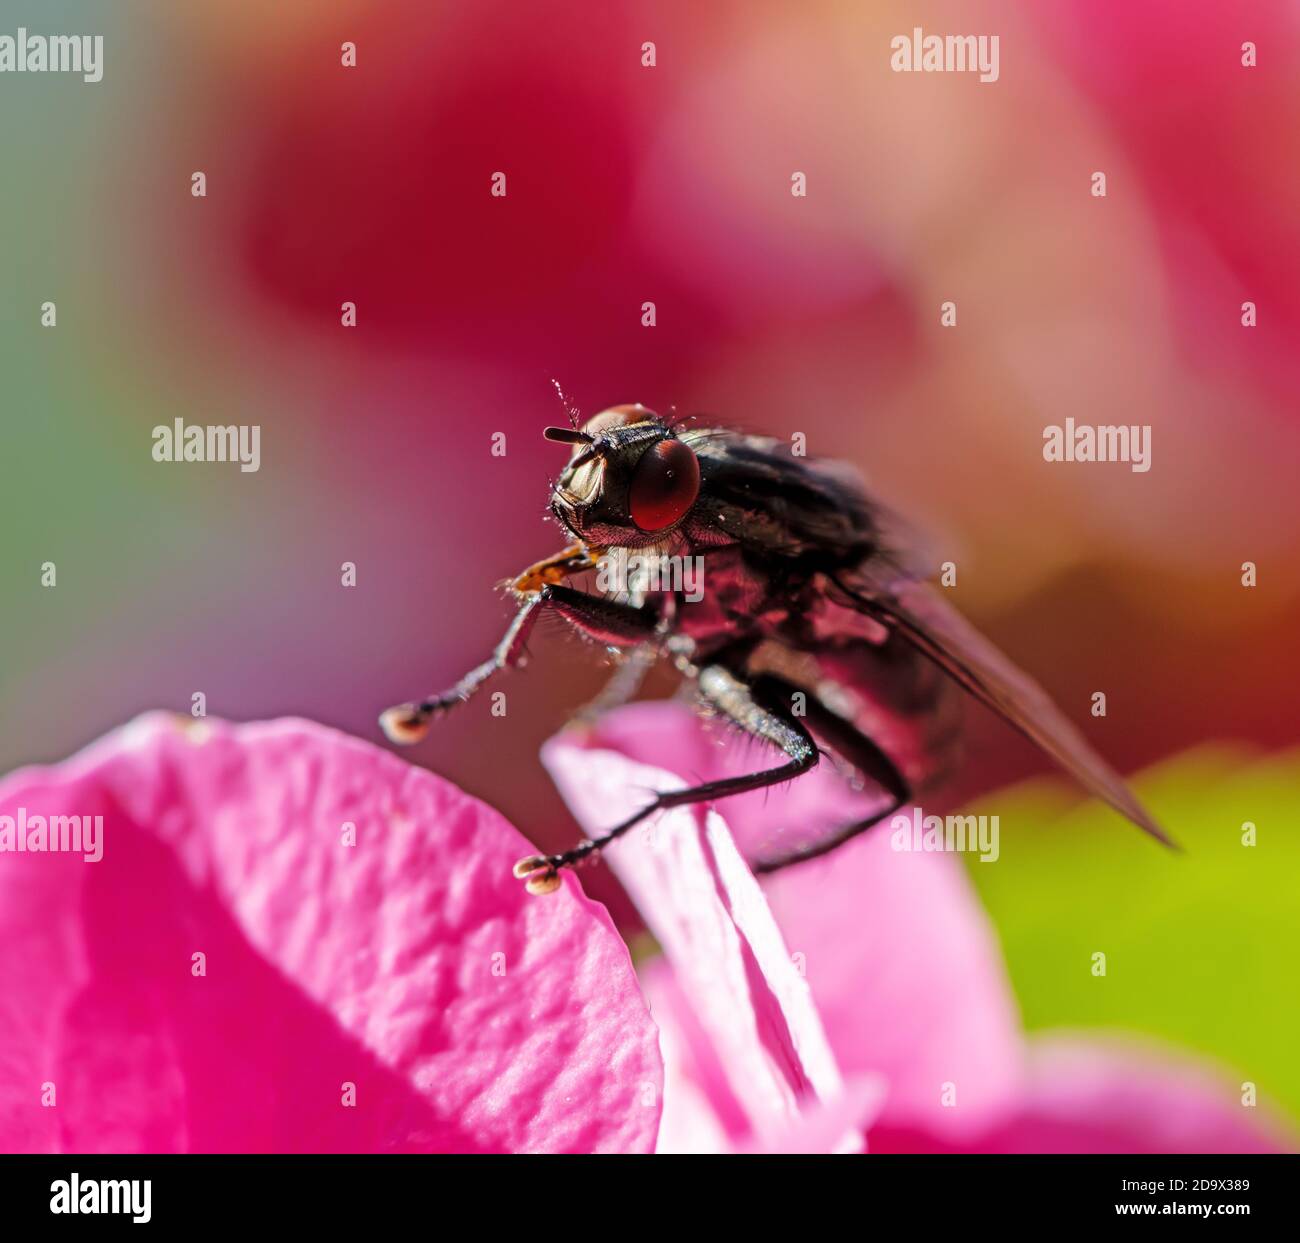 Macro of a fly sitting on a blossom Stock Photo